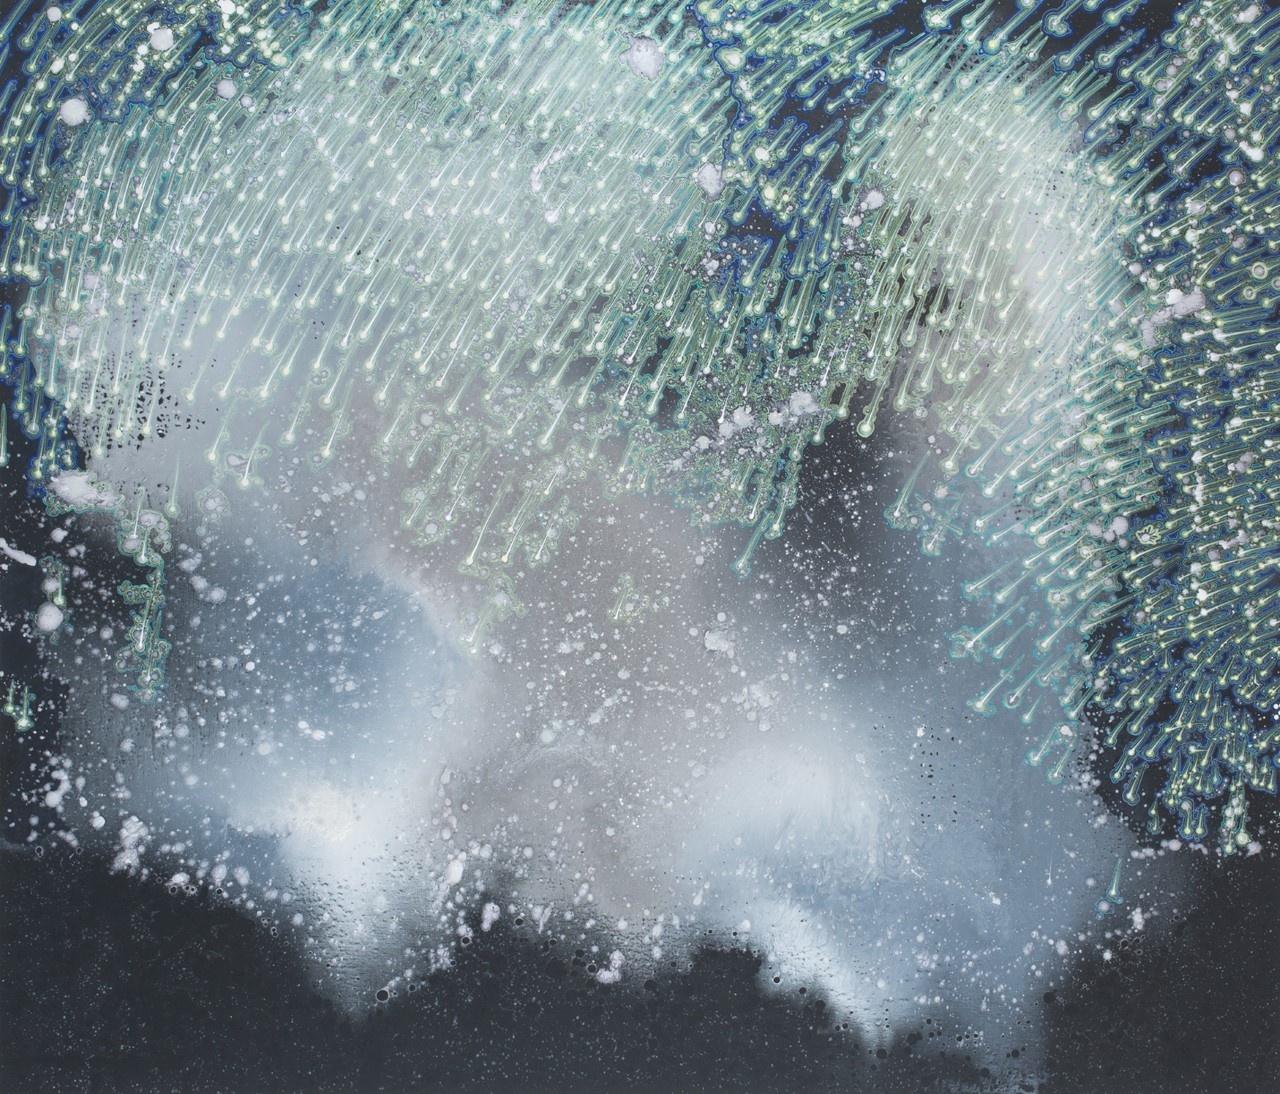 A cascade of green and white flights, like shooting stars, falls from the top of the image towards a white-speckled mist on a black background.